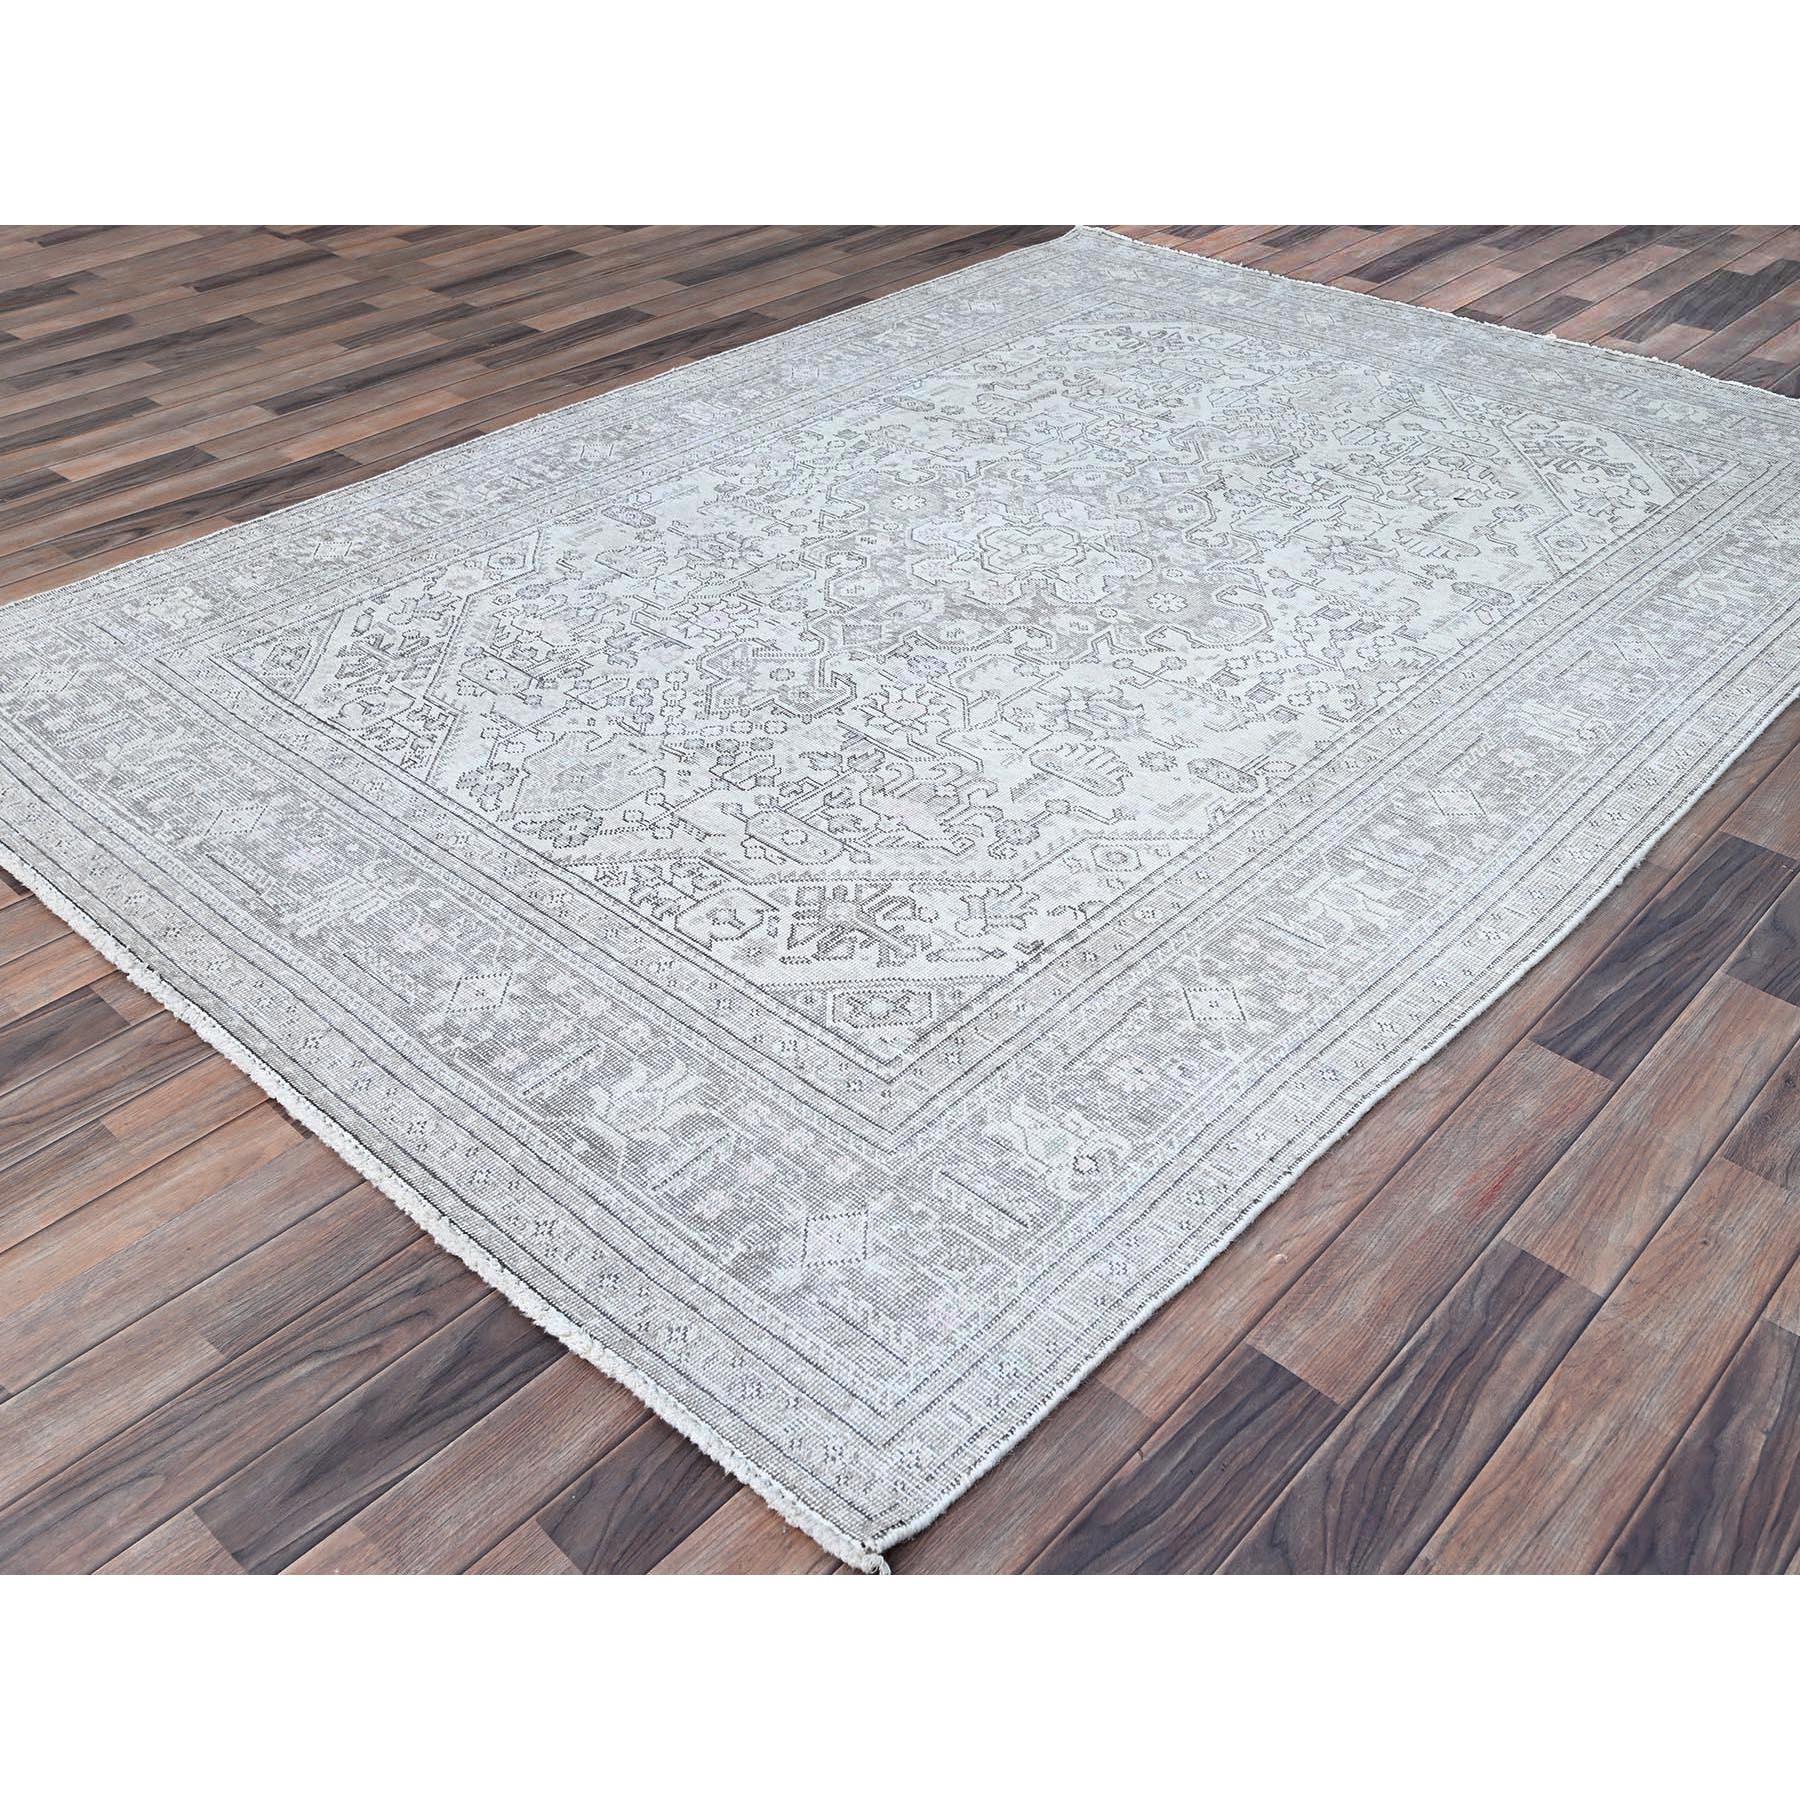 Ivory Hand Knotted Old Persian Tabriz White Wash Geometric Design Shiny Wool Rug In Excellent Condition For Sale In Carlstadt, NJ